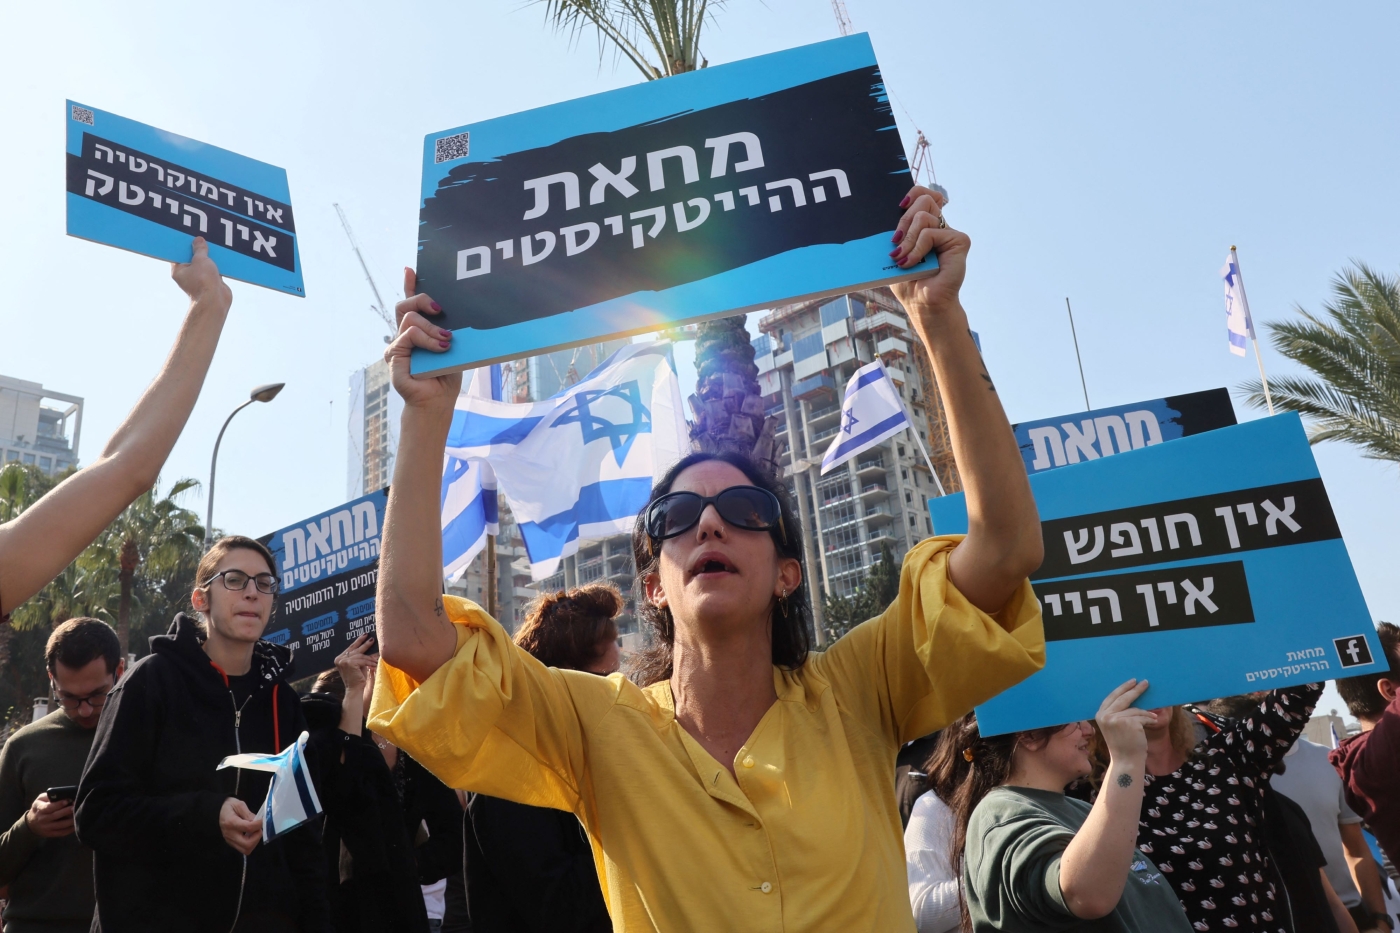 High-tech company workers block a road and lift placards as they strike for an hour in Israel's coastal city of Tel Aviv, on January 24, 2023, to protest the Israeli government's controversial plans to overhaul the judicial system (AFP)